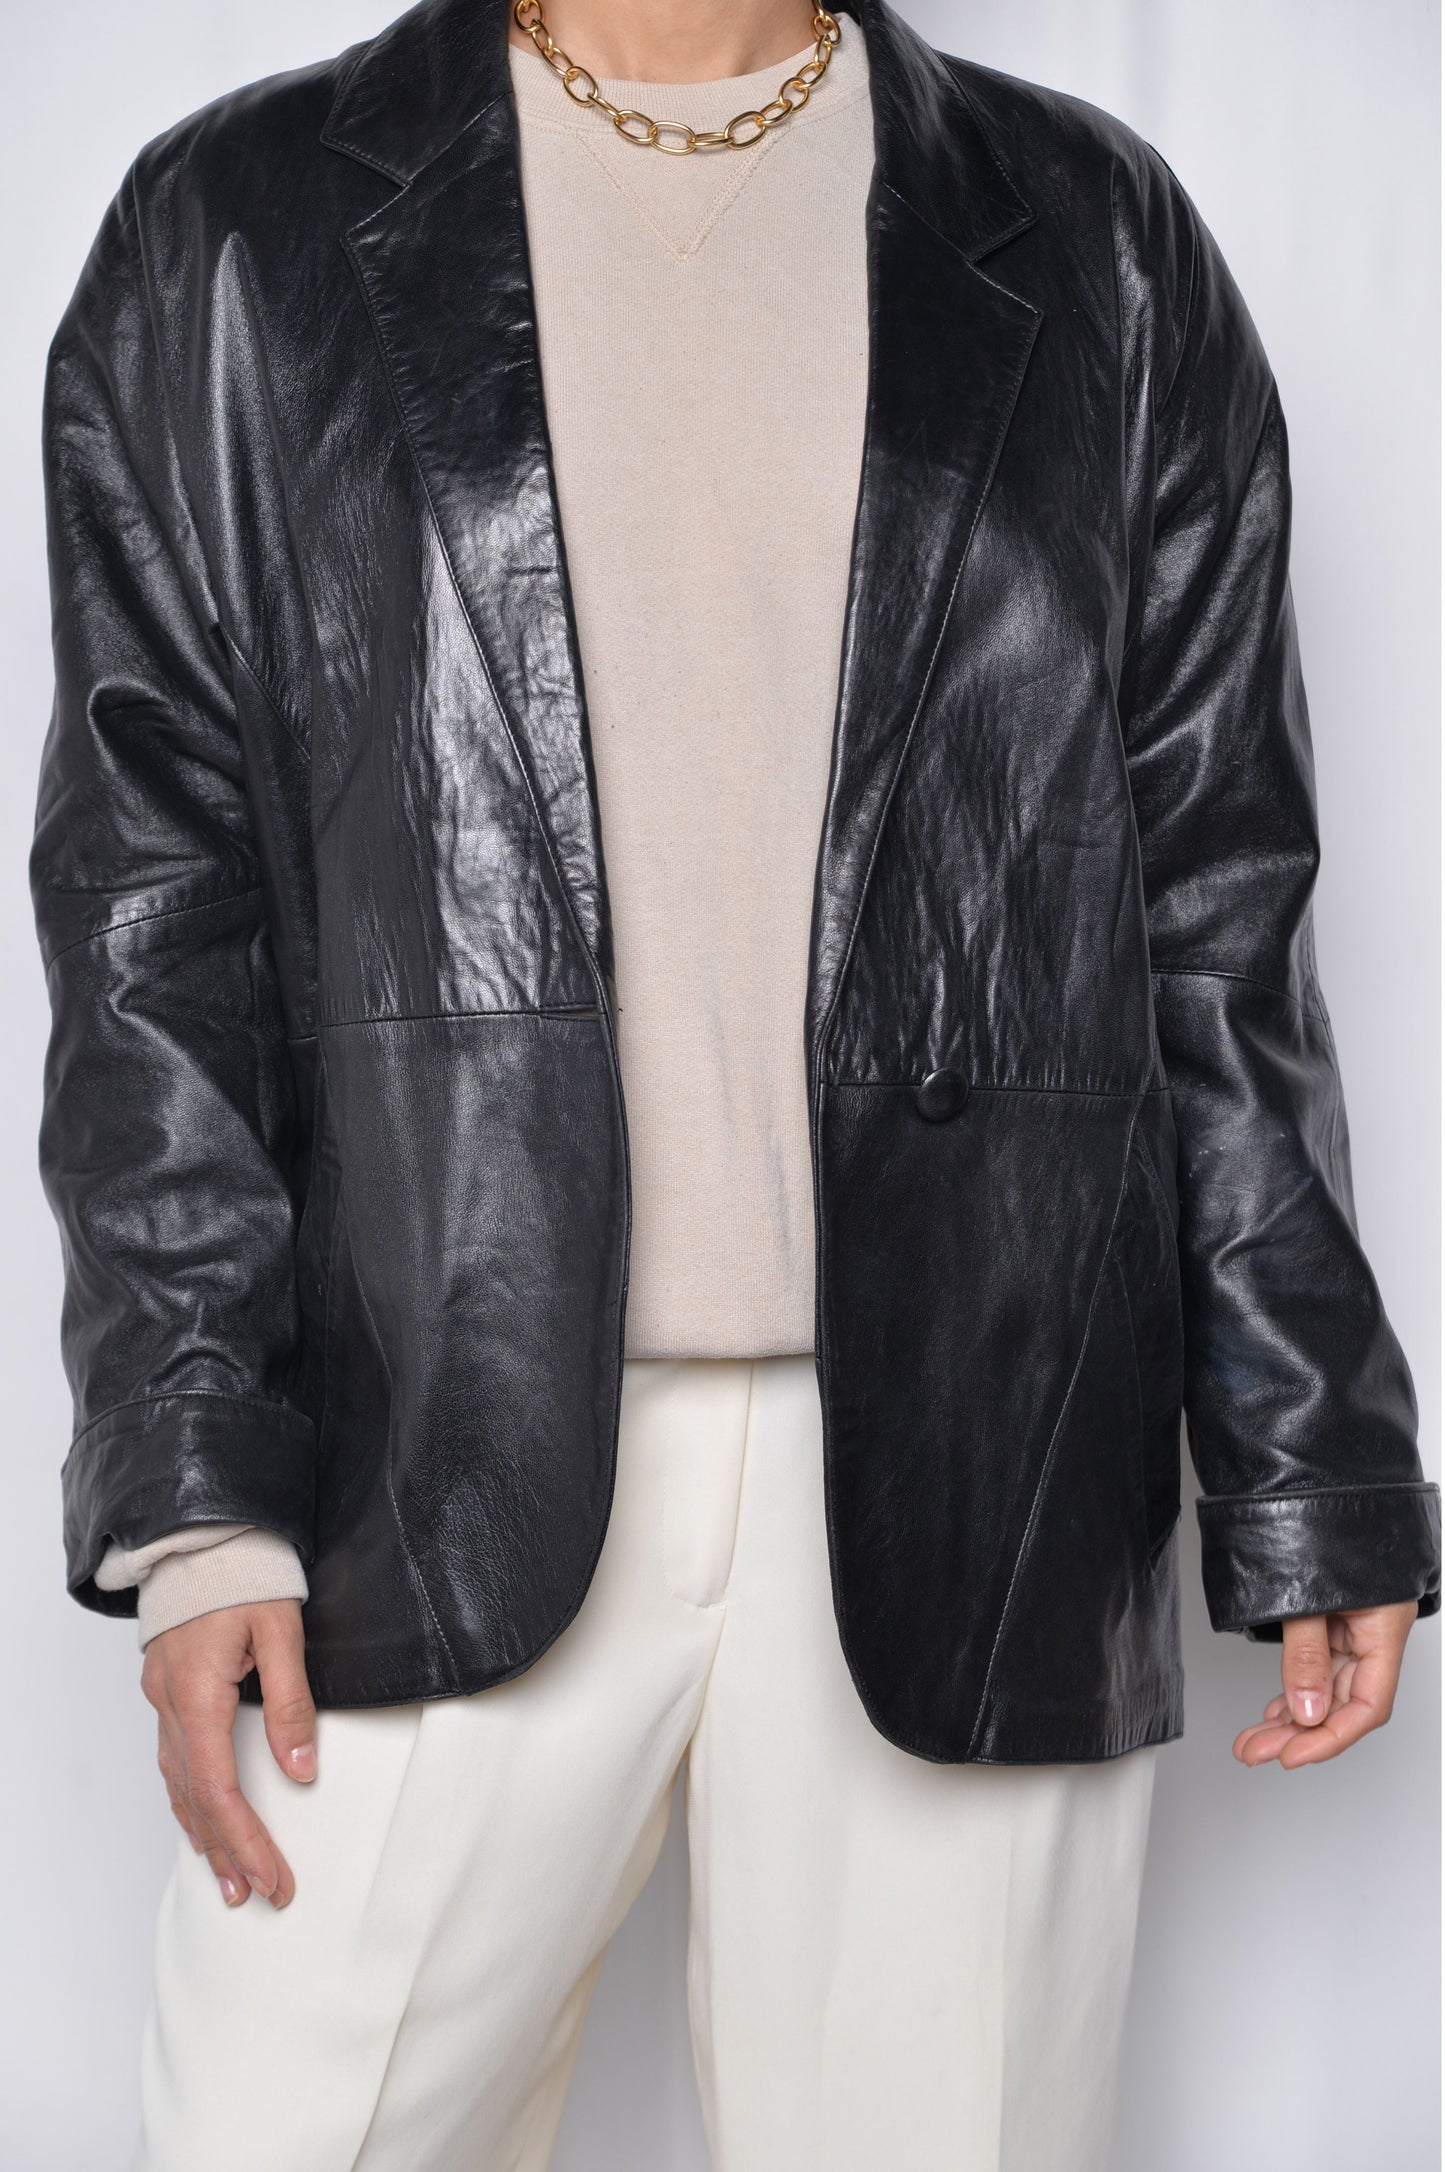 Textured Patent Leather Jacket